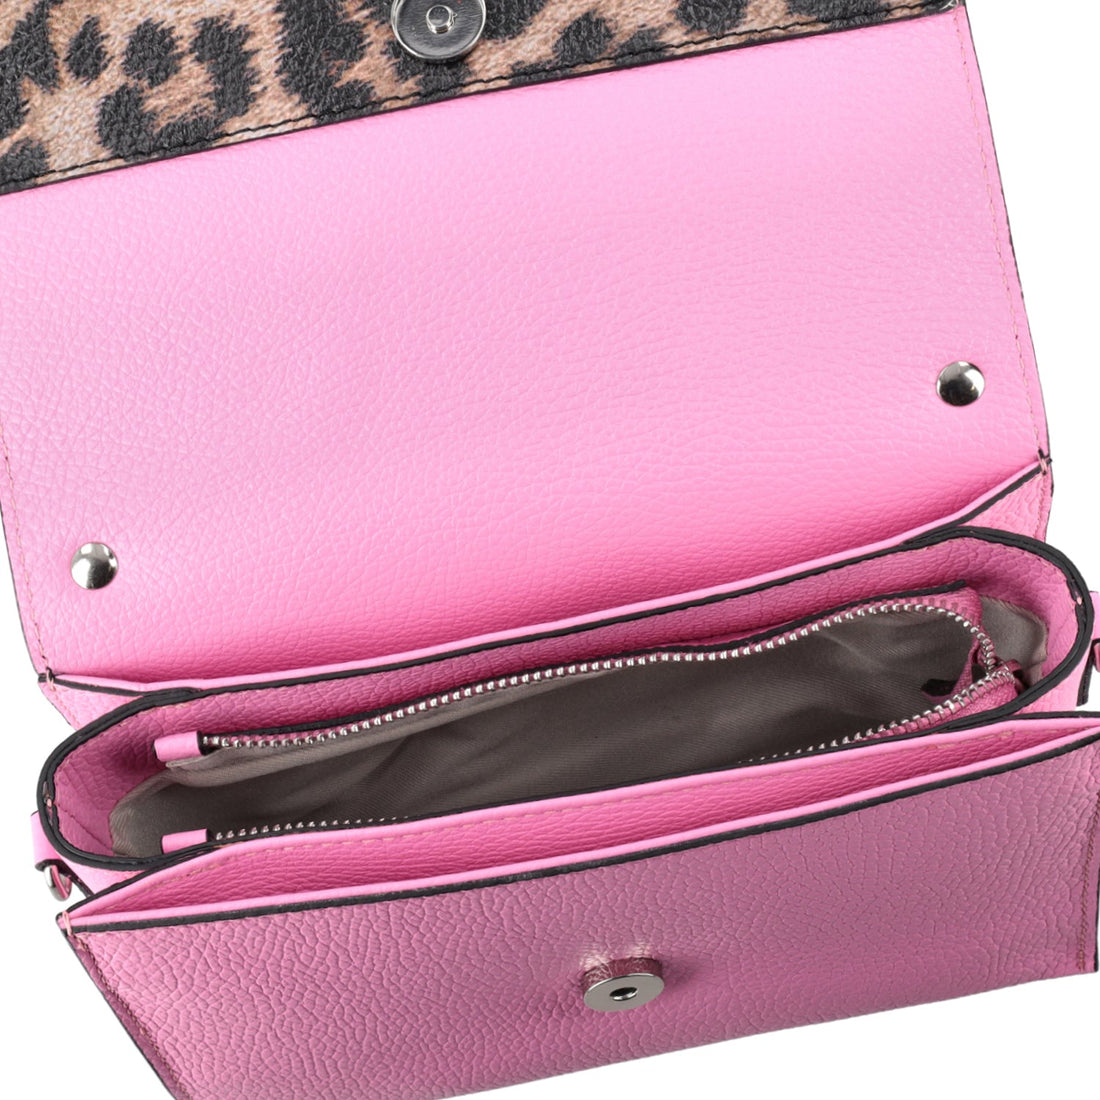 PINK NARCISO HAND BAG WITH SPOTTED FLAP